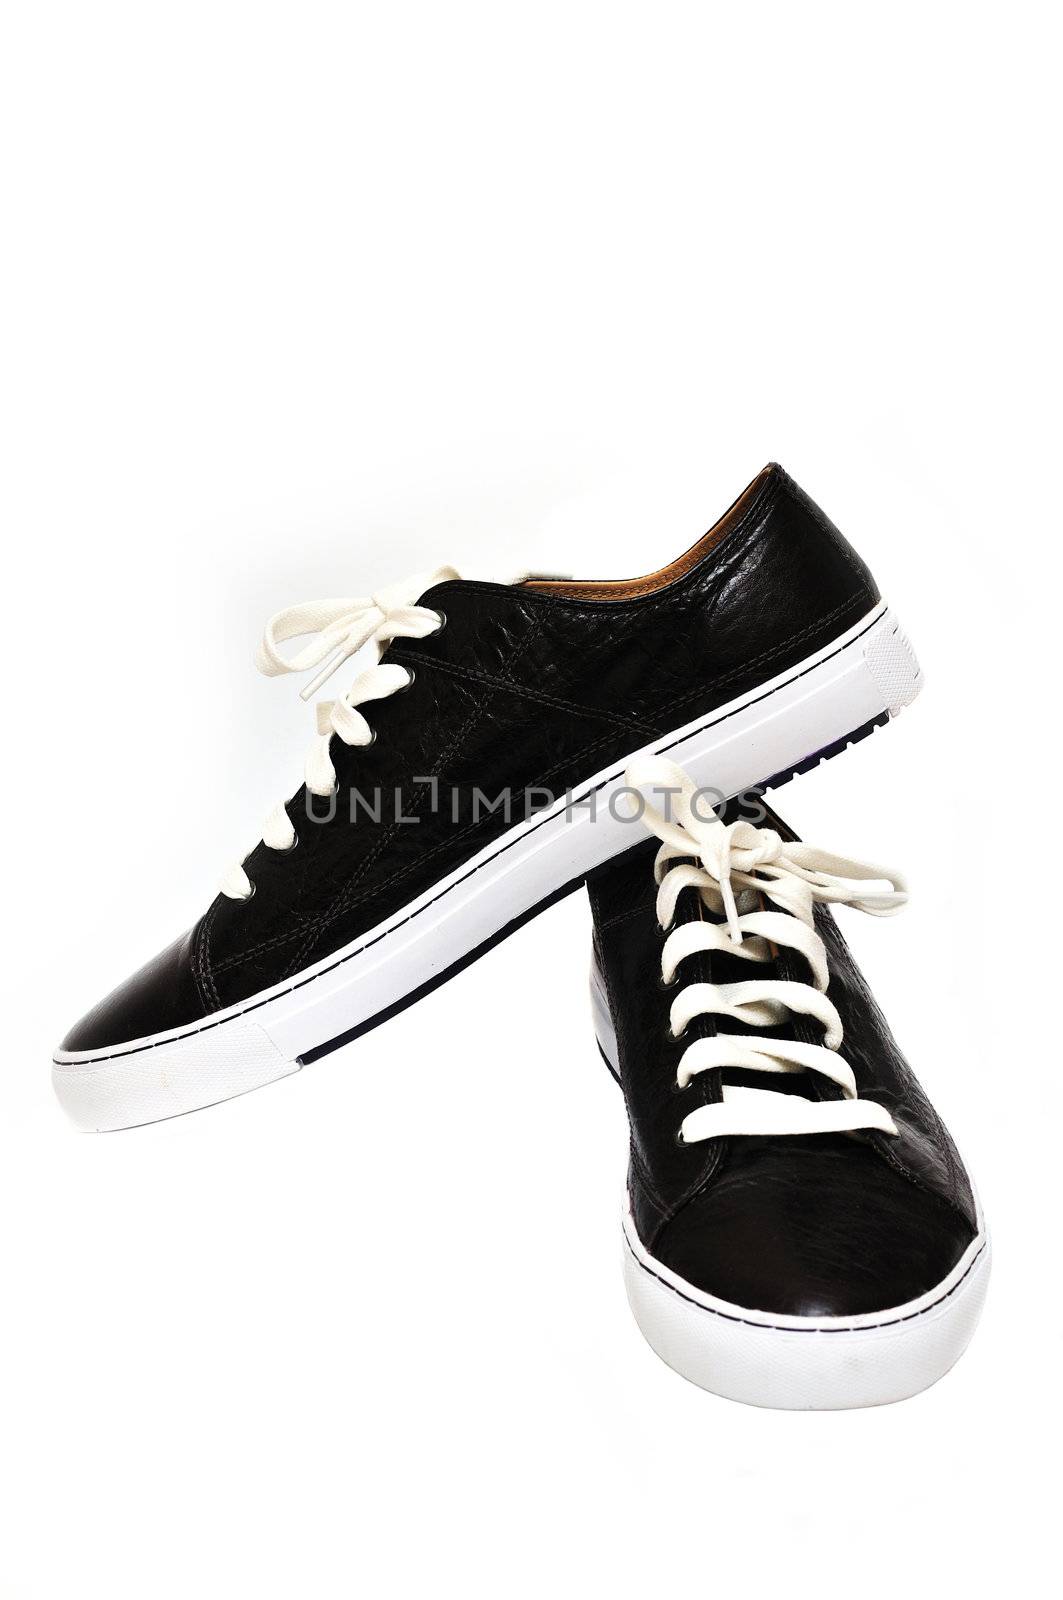 Sport leather man's shoes isolated on the white